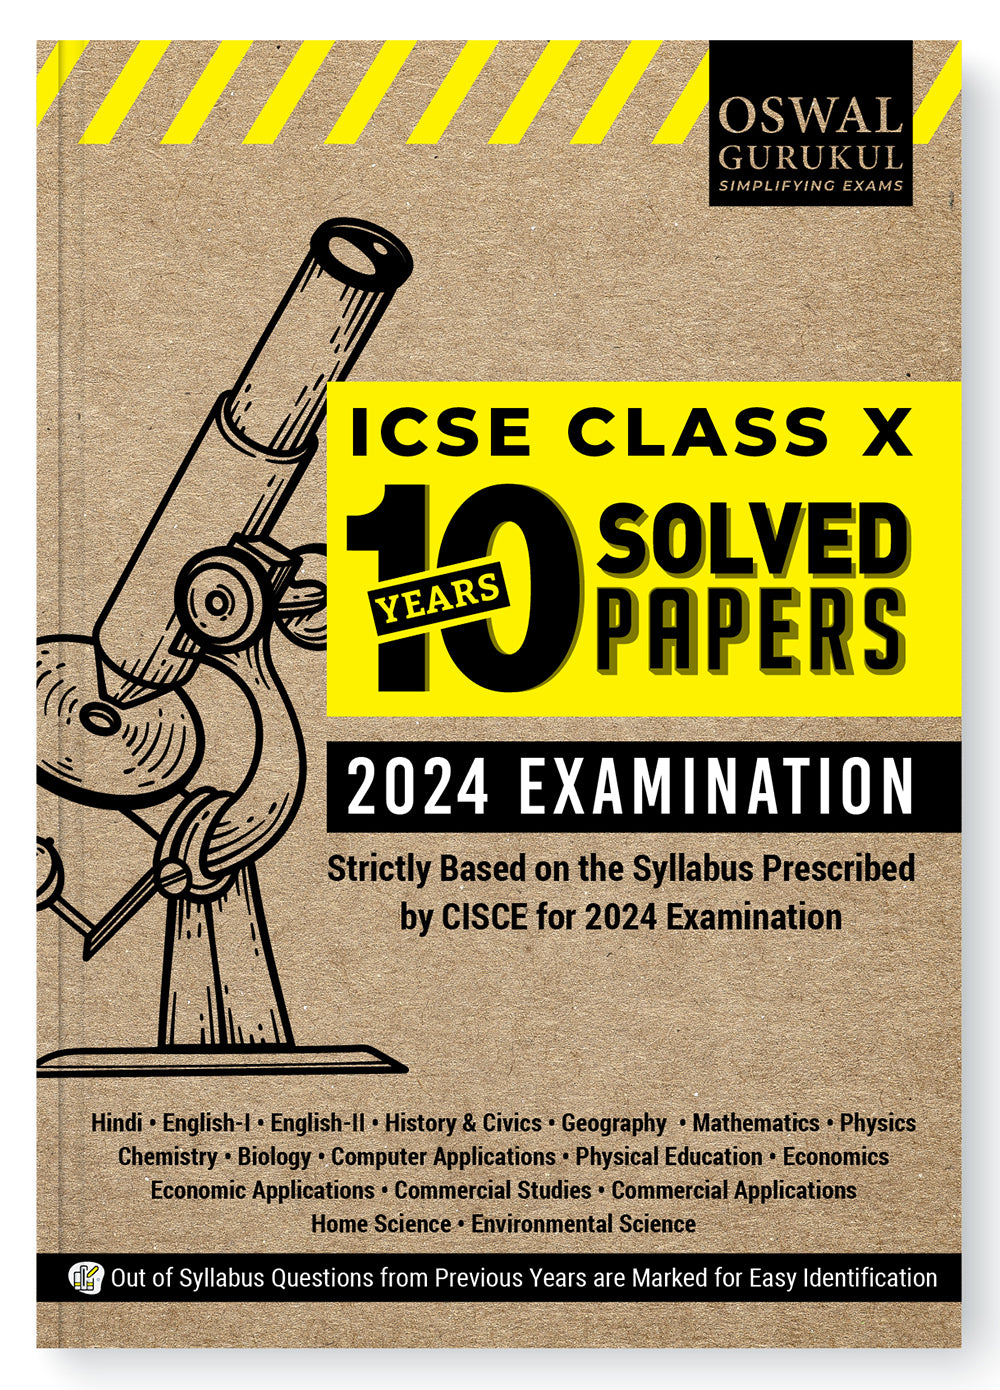 ICSE Solved Papers for class 10